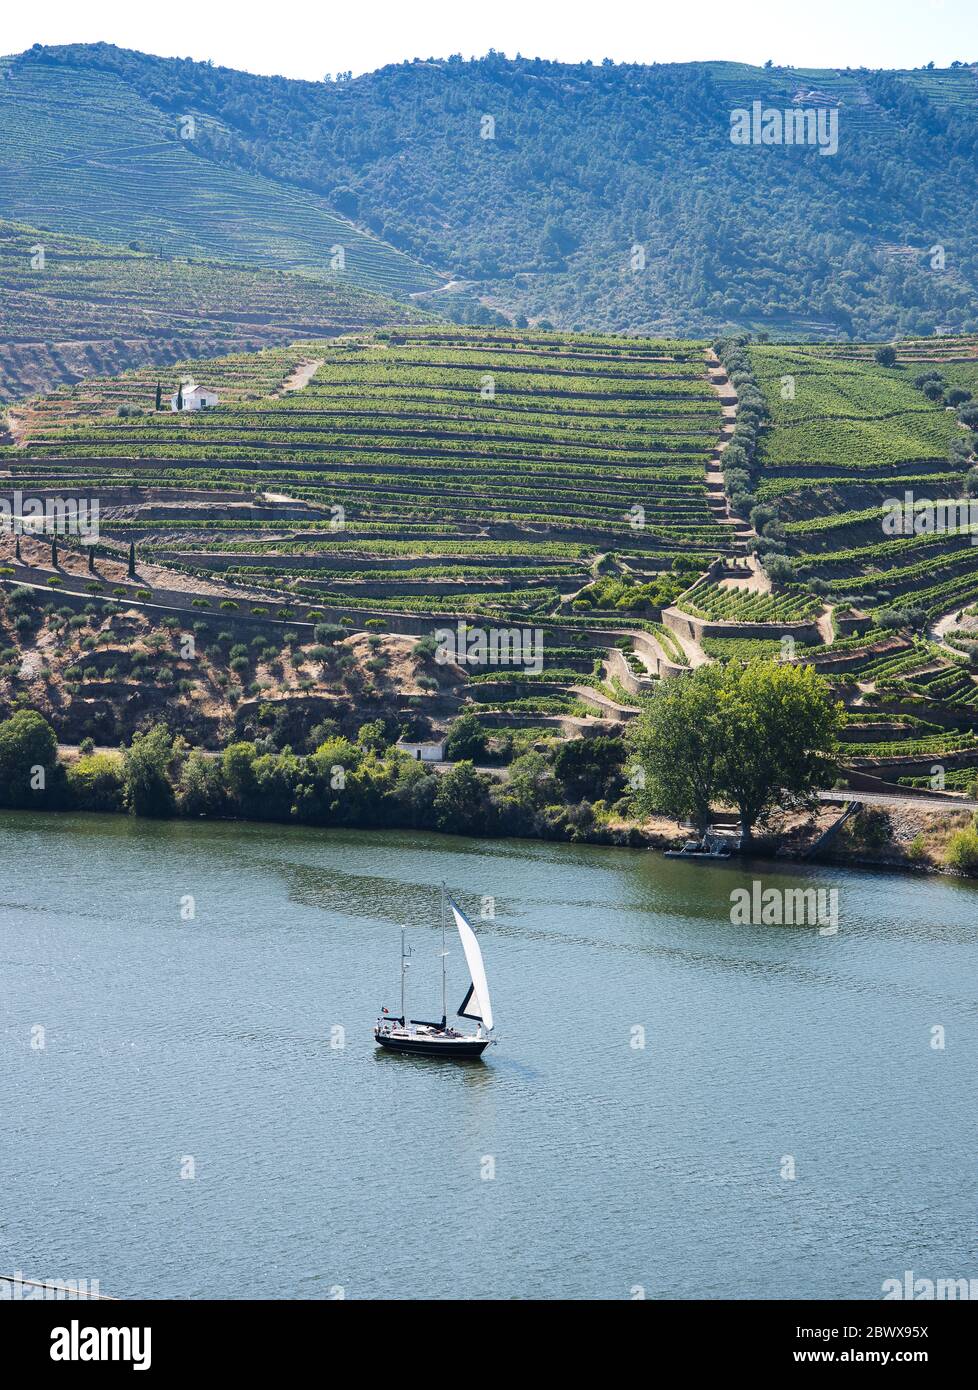 Lone yacht sailing on Douro river, midst the terraced hillsides covered in vines near Pinhão Northern Portugal Stock Photo